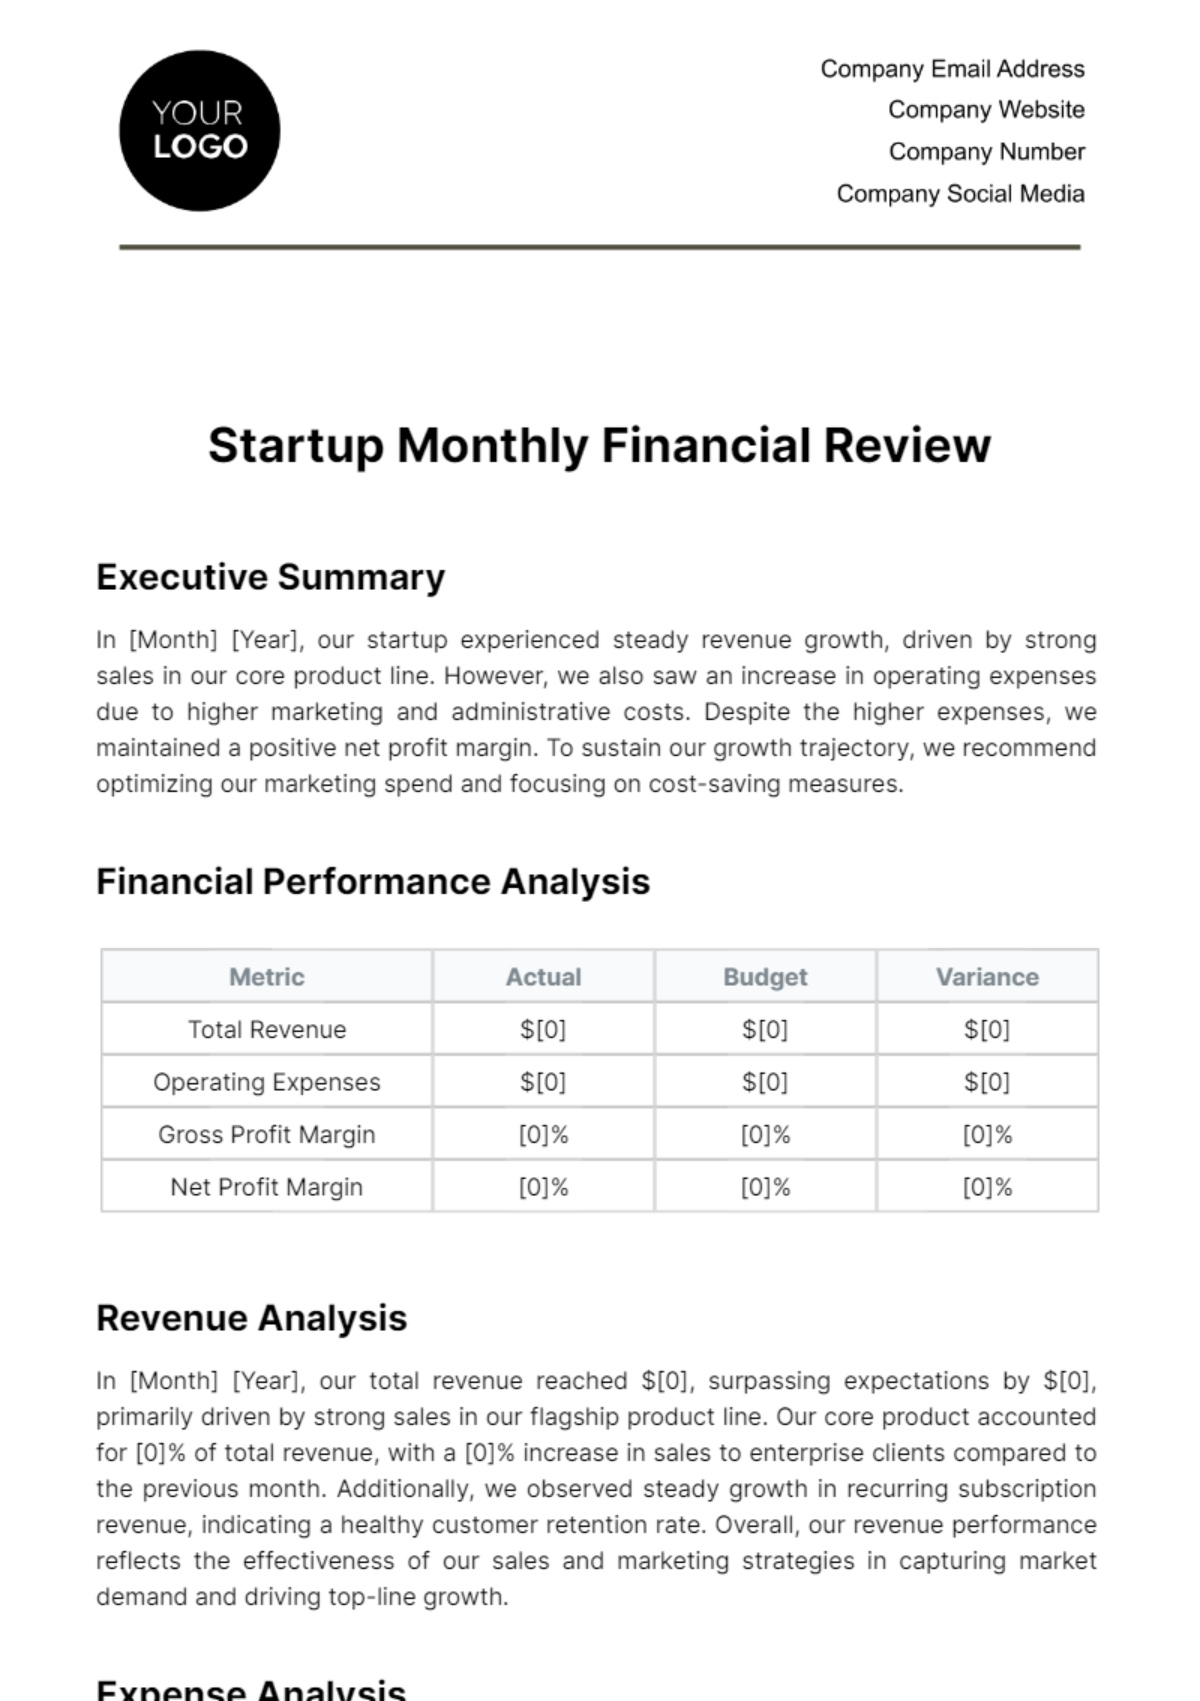 Startup Monthly Financial Review Template